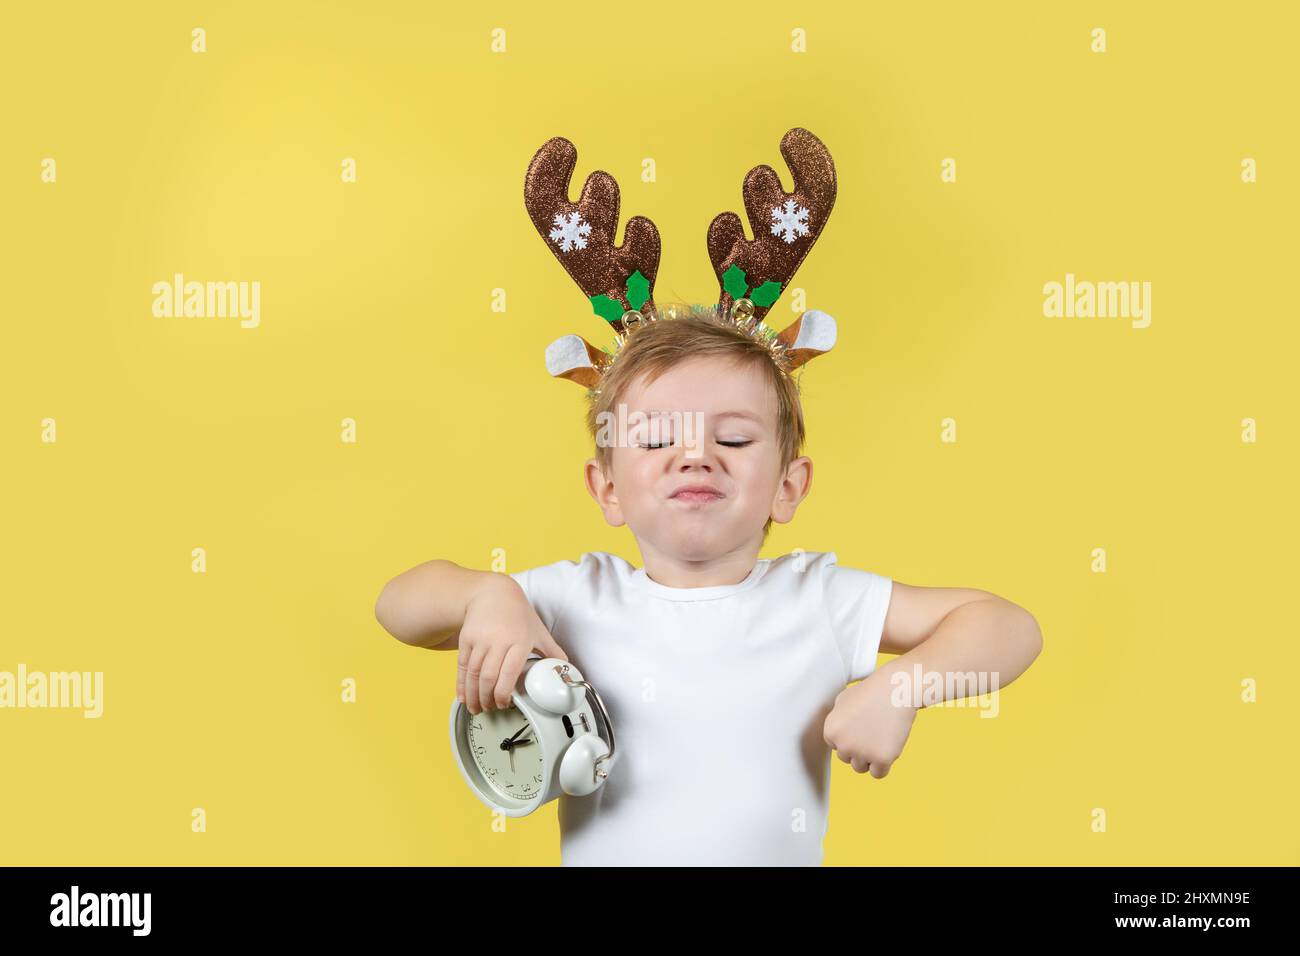 Cute caucasian boy in in christmas reindeer costume with alarm clocks in his hands making funny faces. A place for your text. Studio shot on a yellow Stock Photo